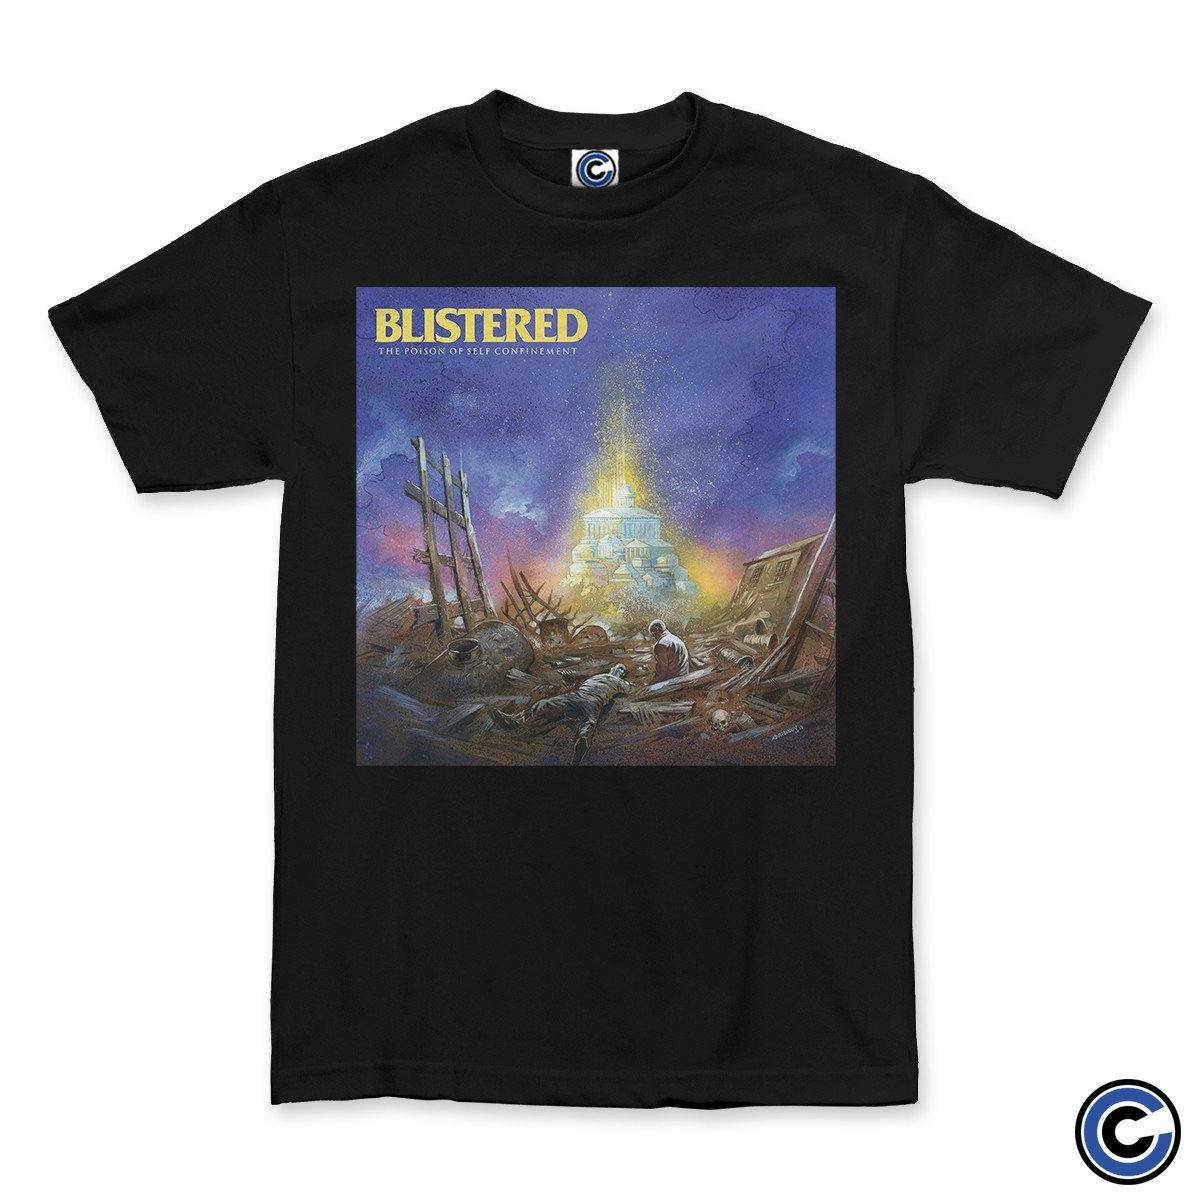 Buy – Blistered "Self Confinement" Shirt – Band & Music Merch – Cold Cuts Merch